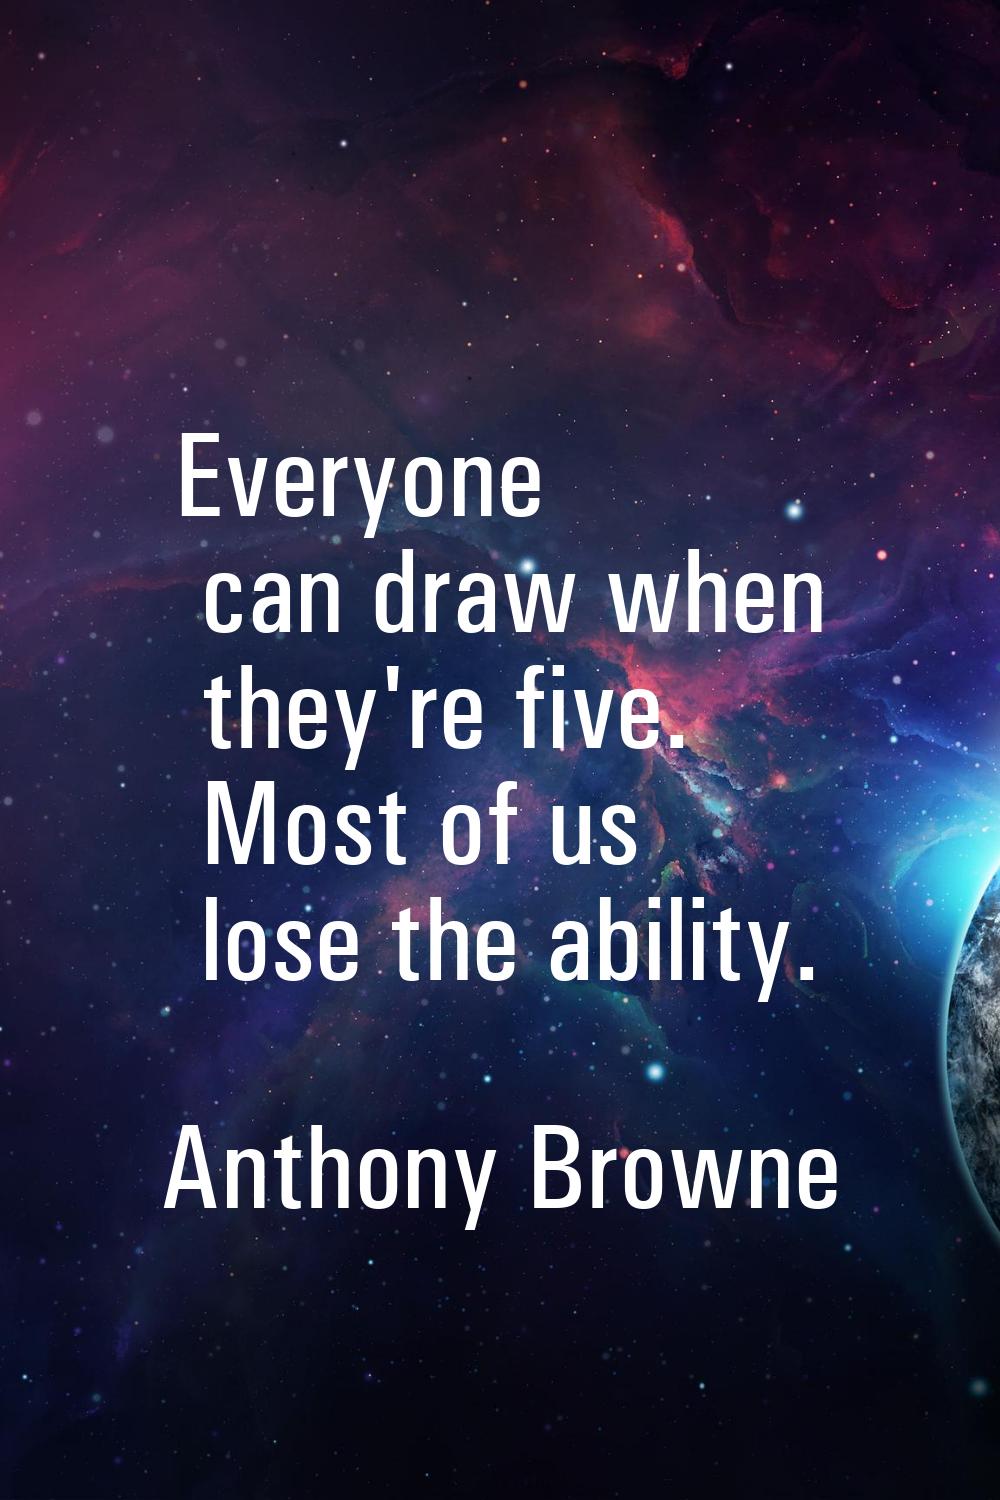 Everyone can draw when they're five. Most of us lose the ability.